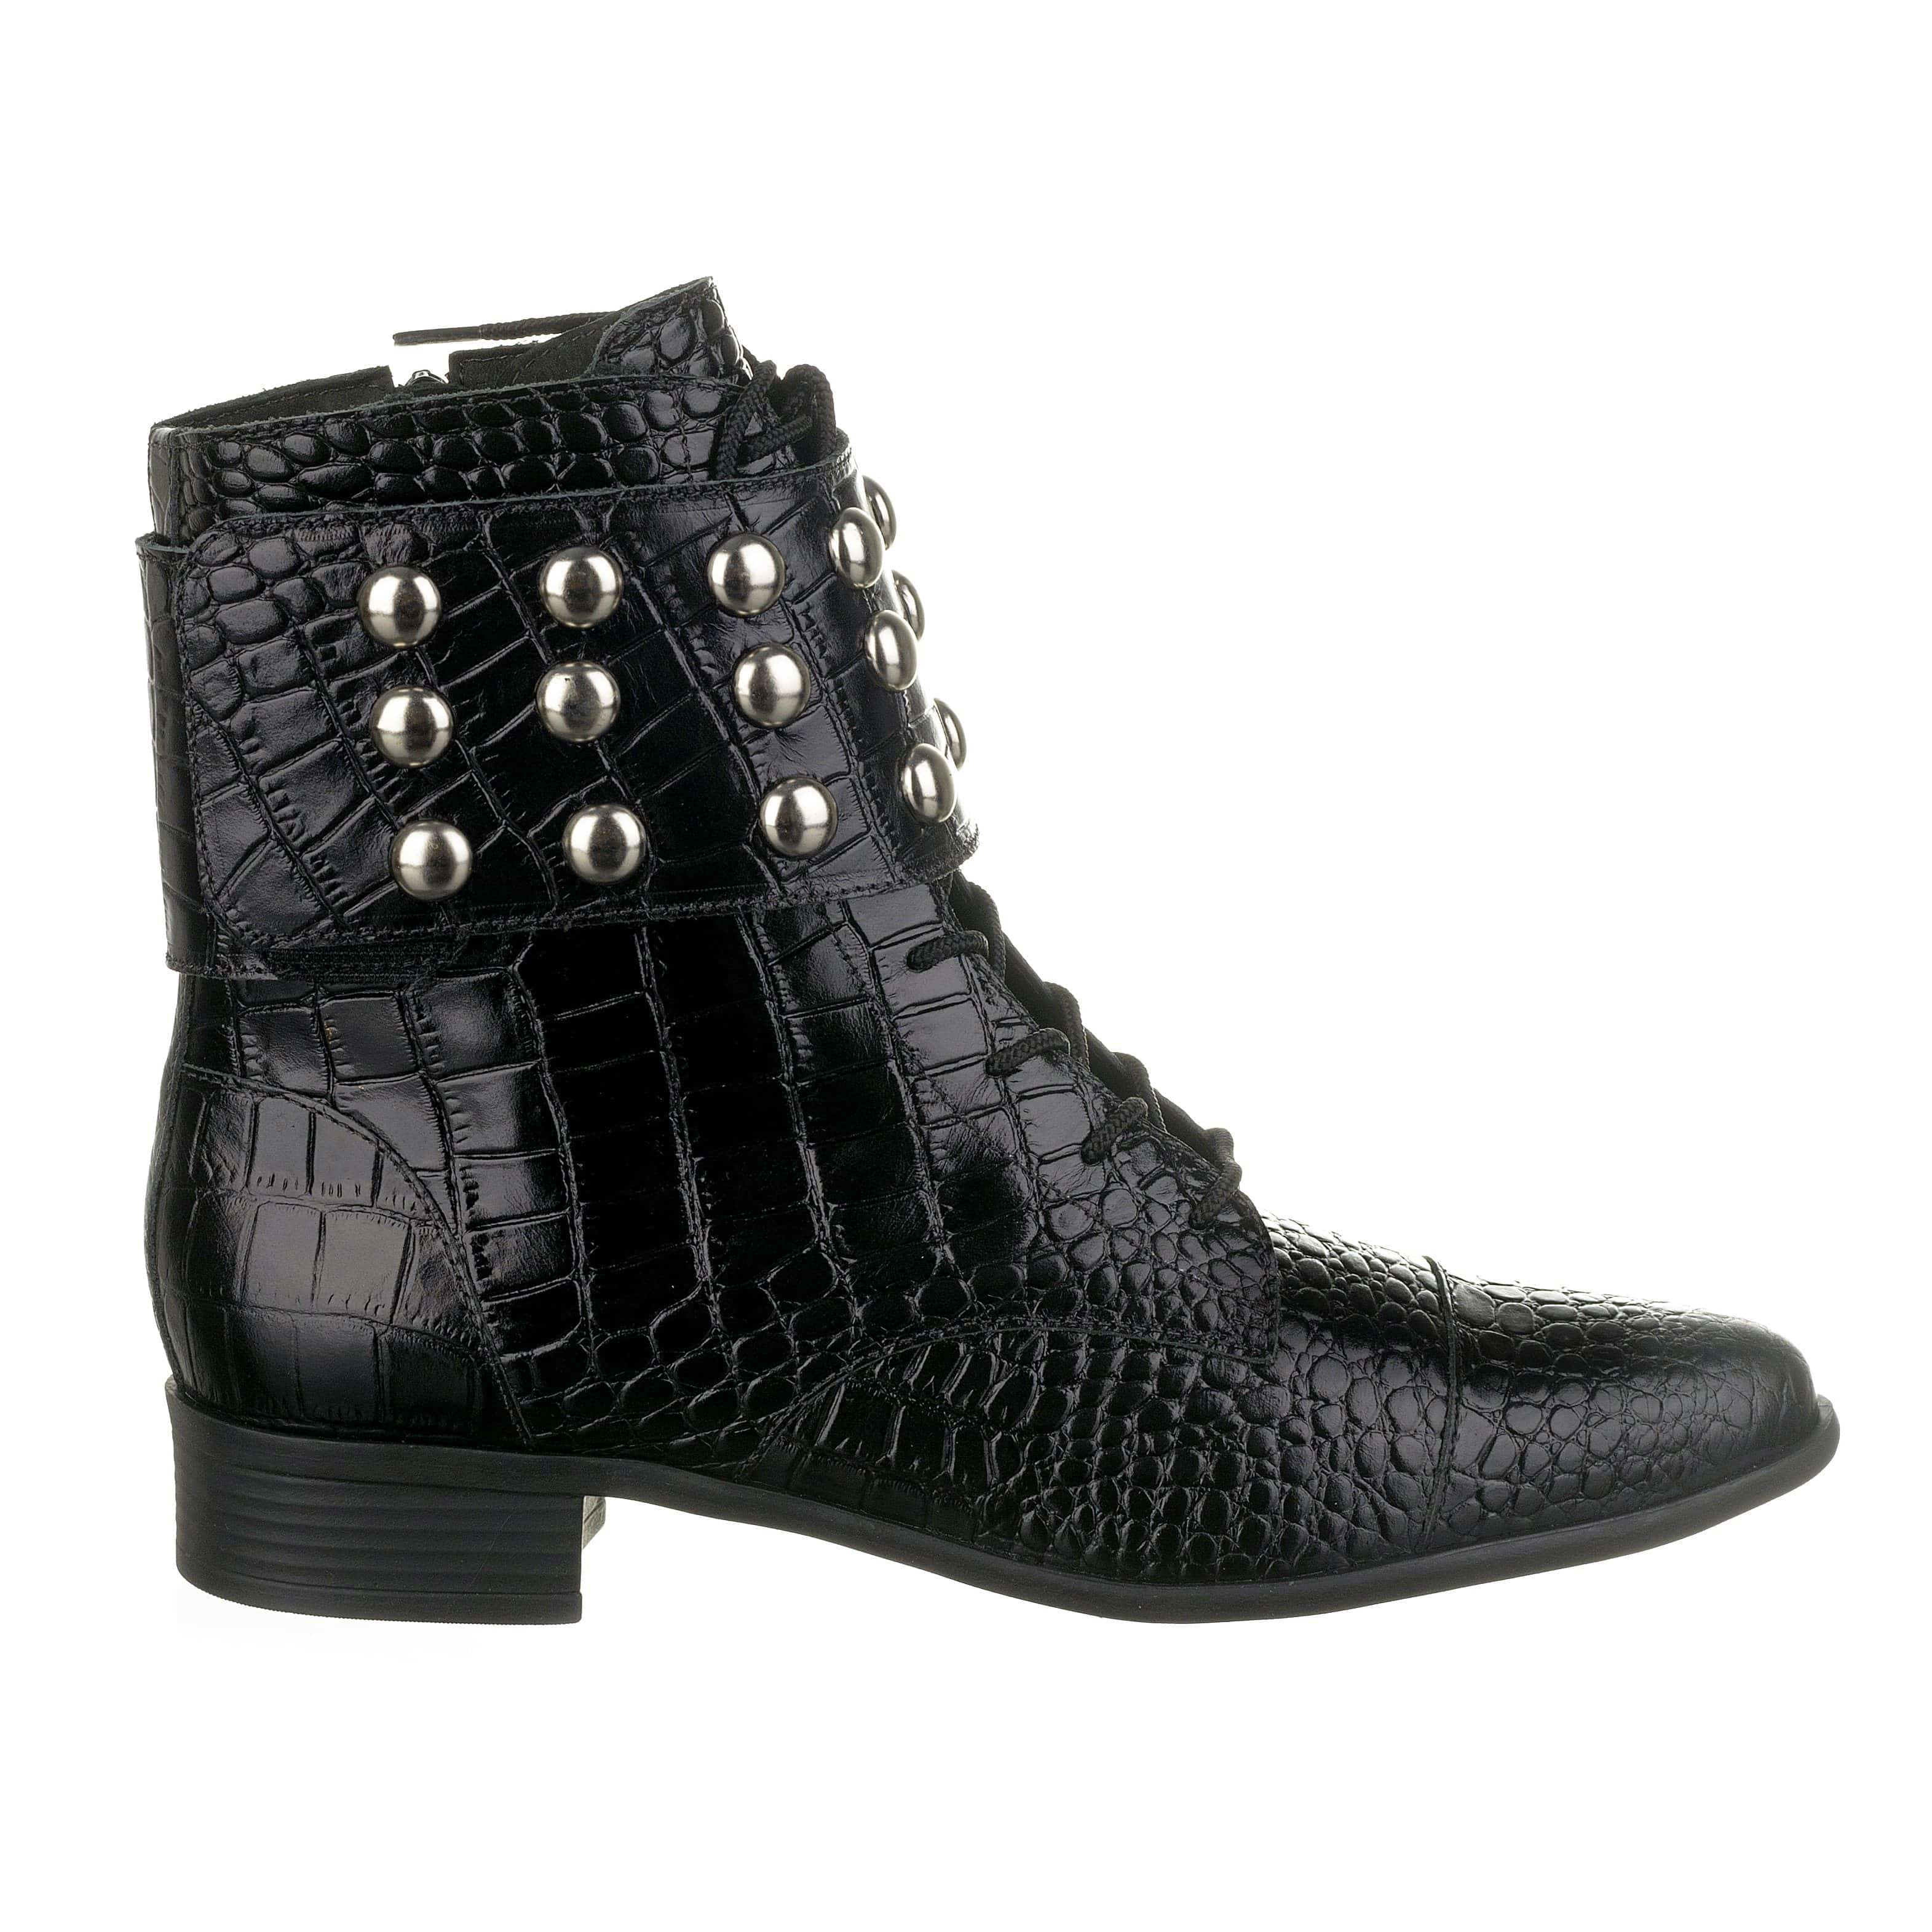 Taylor - Removable Studded Cuff Moto Bootie - Juliana Heels 